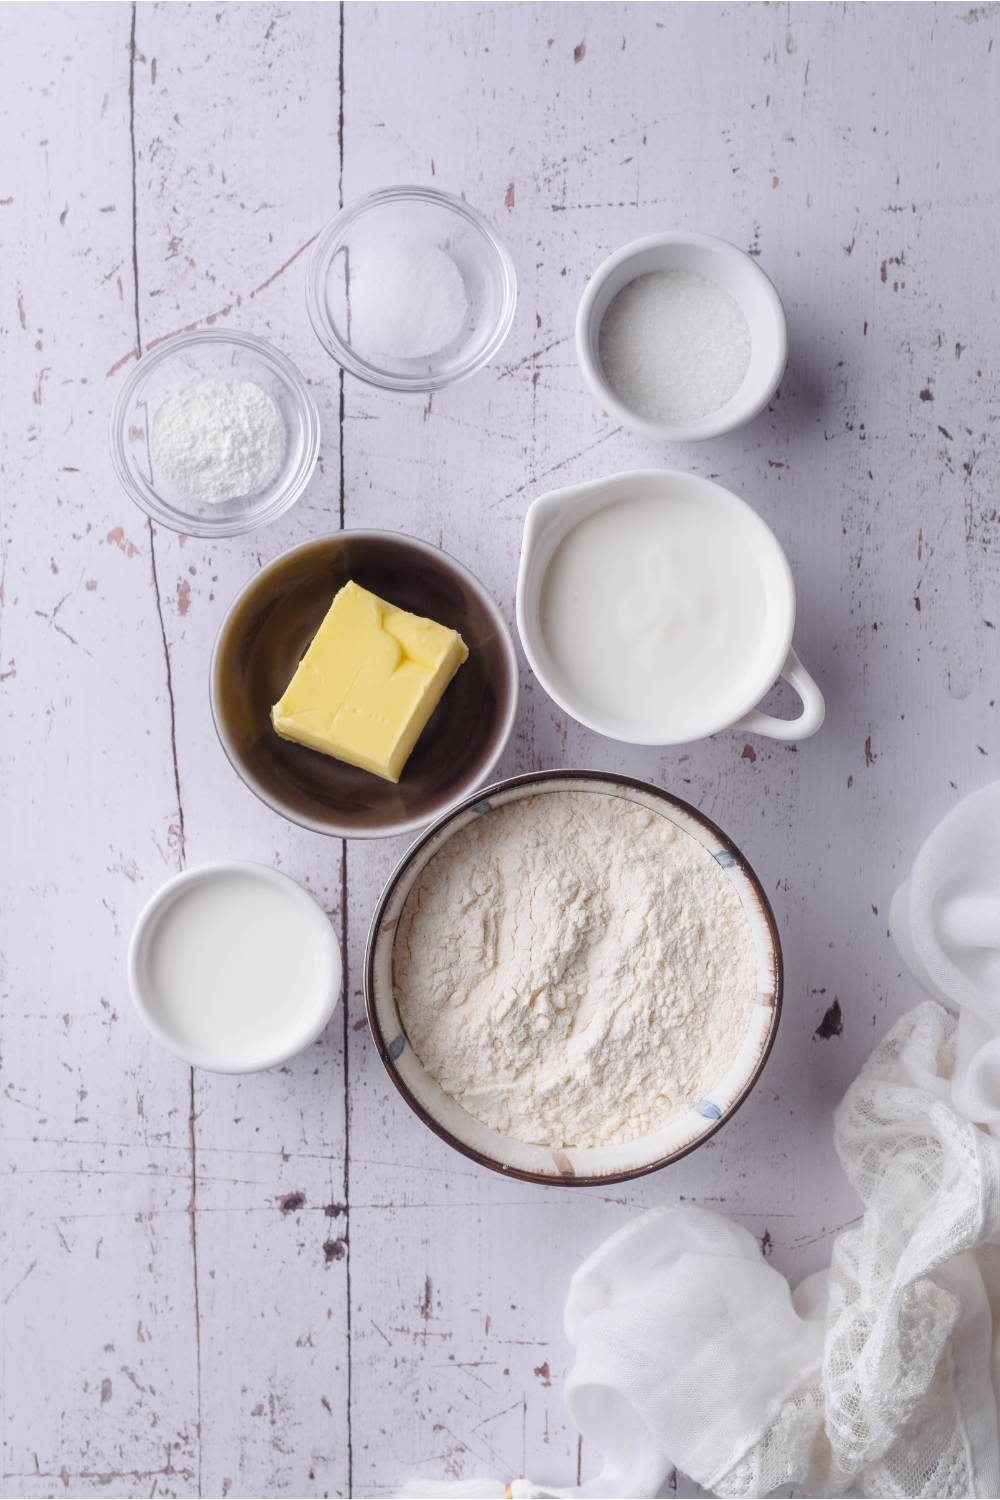 An assortment of ingredients including bowls of flour, buttermilk, milk, butter, and baking powder.